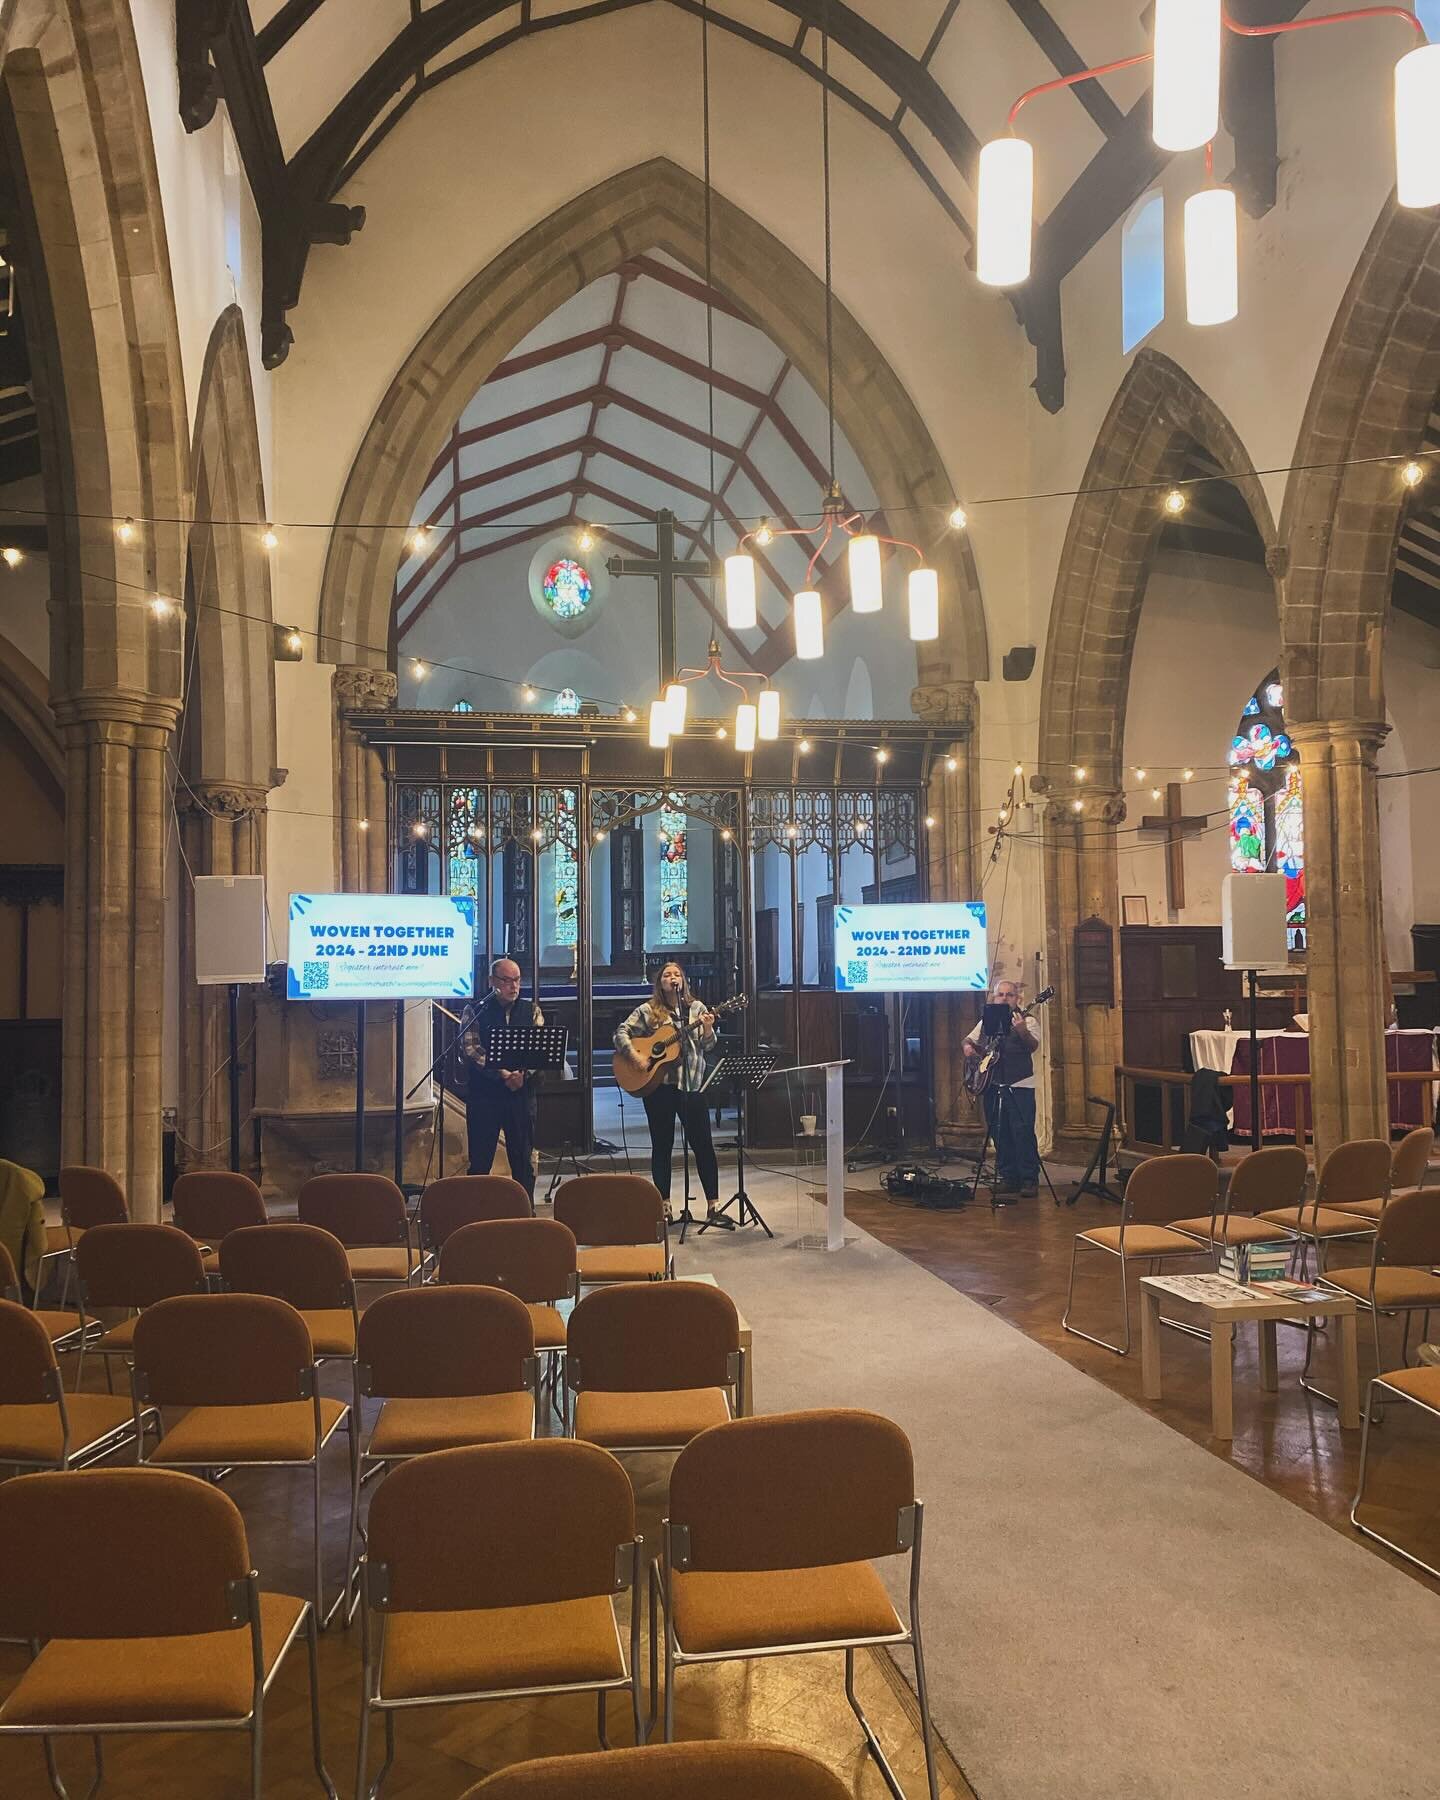 Getting all setup here!

See you at 10.30am, everyone is so welcome

#sundays #forthepeopleofbasford